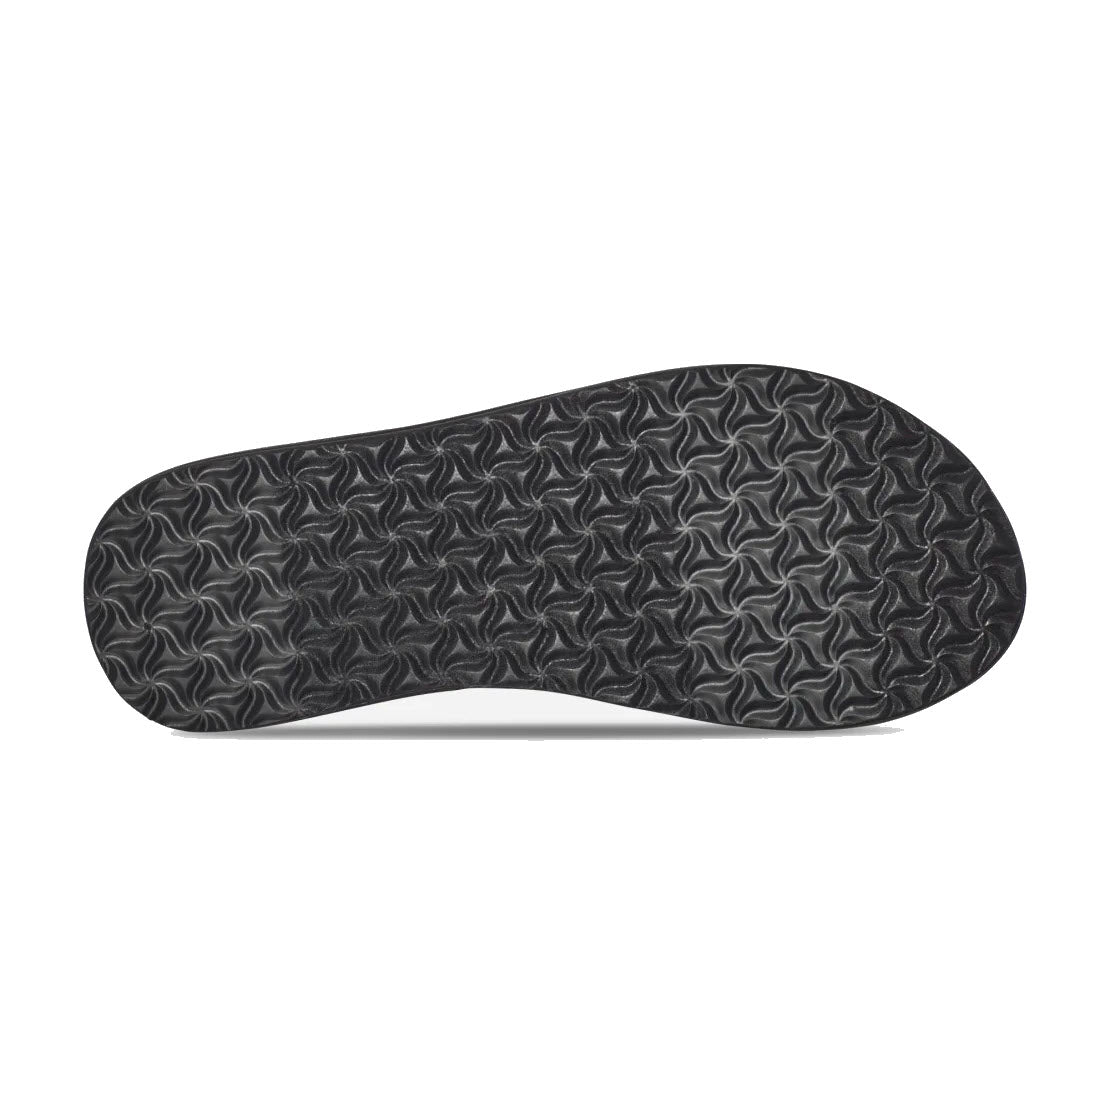 Bottom view of a Teva Olowahu Maple Sugar Multi - Womens sandal sole with a textured black pattern design on a white background.